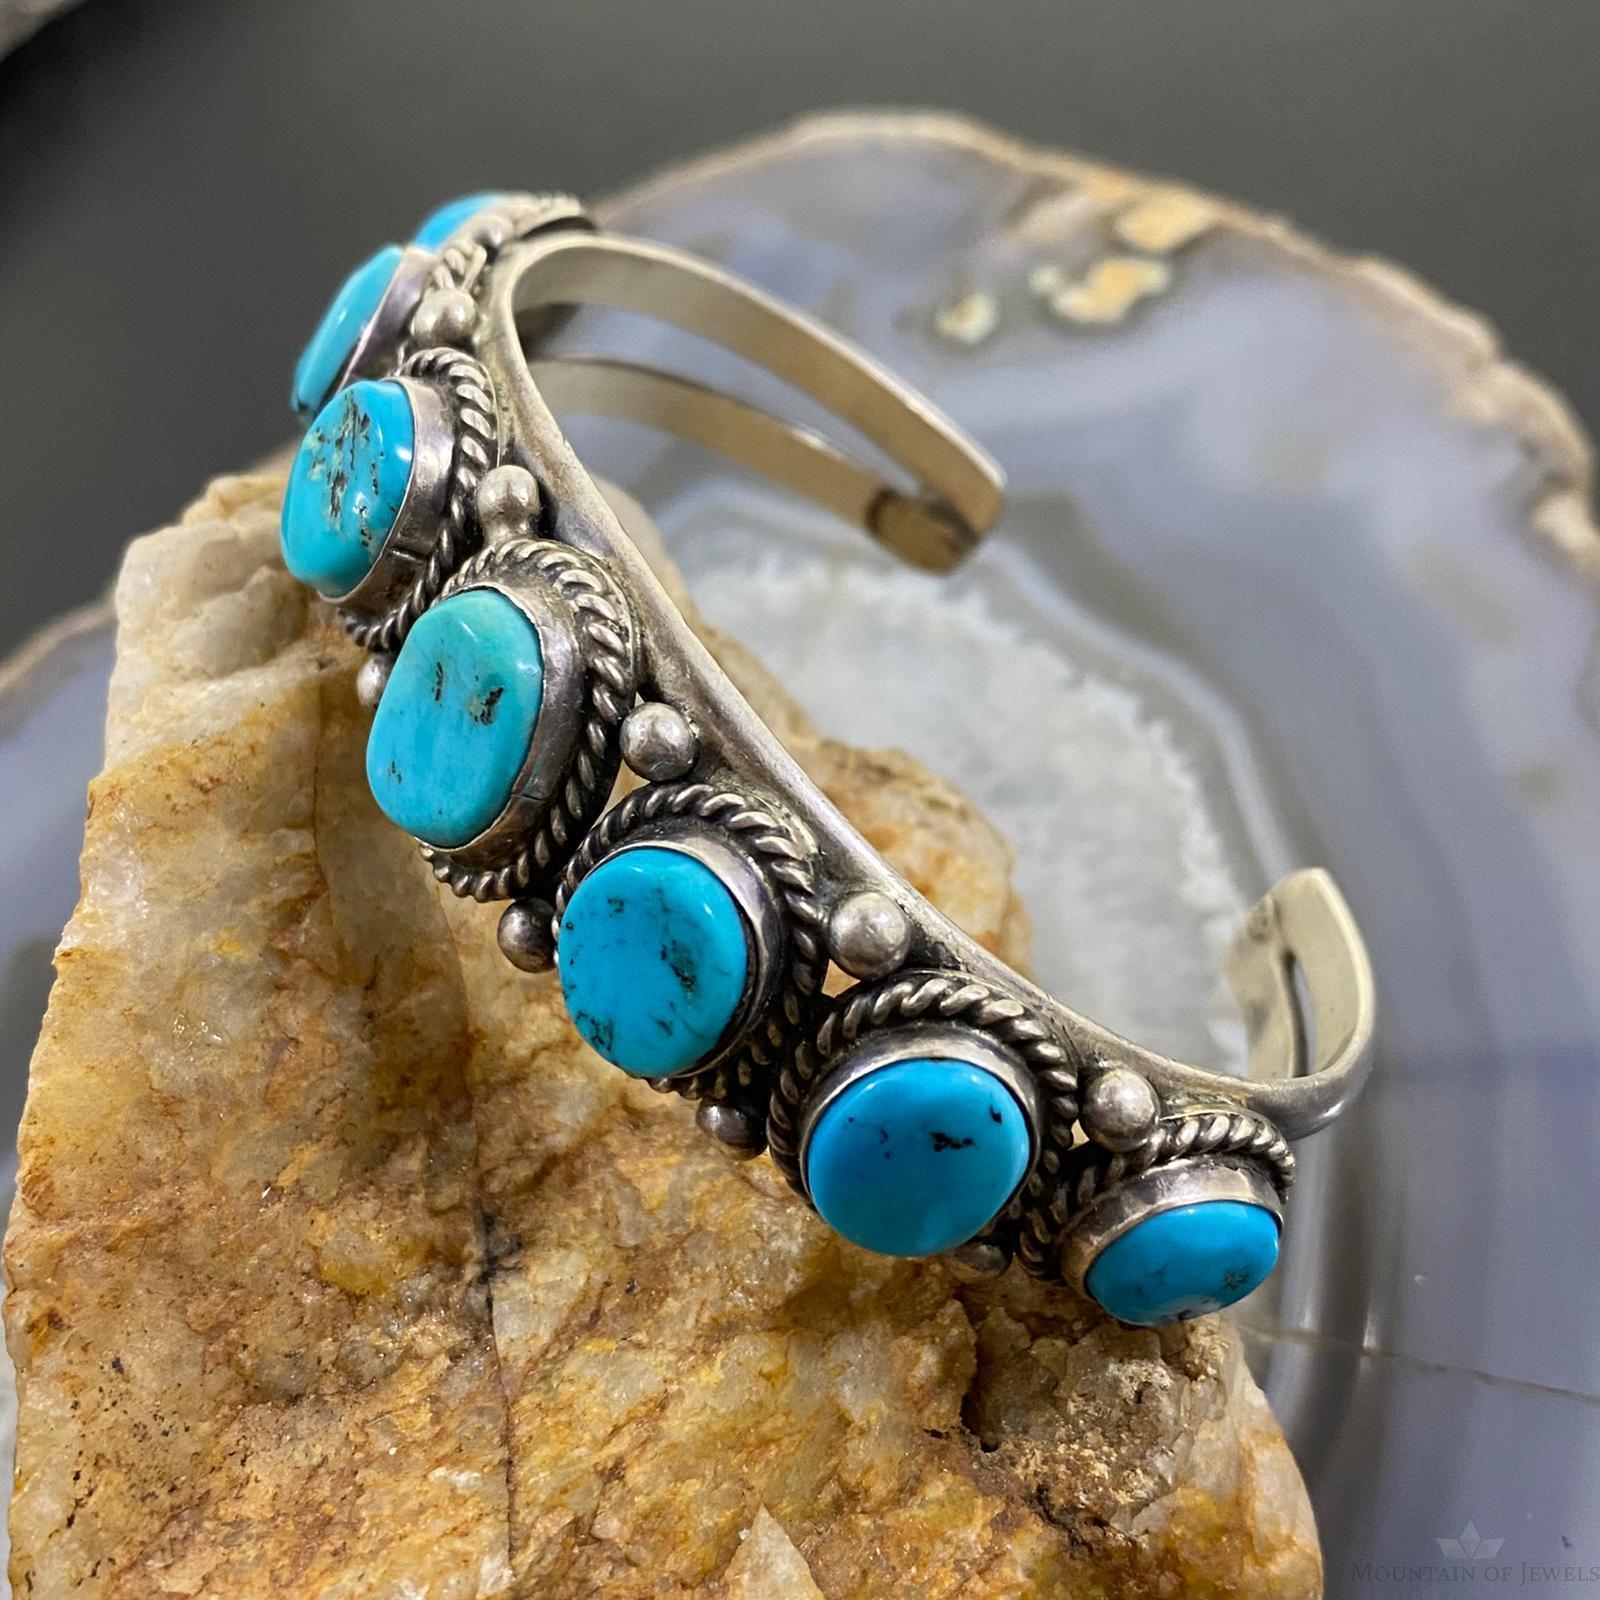 Sterling Silver Turquoise Bracelet Southwest Cuff Tribal Bangle Vintage  Jewelry - CranberryManor Fine Antiques & Vintage Collectibles